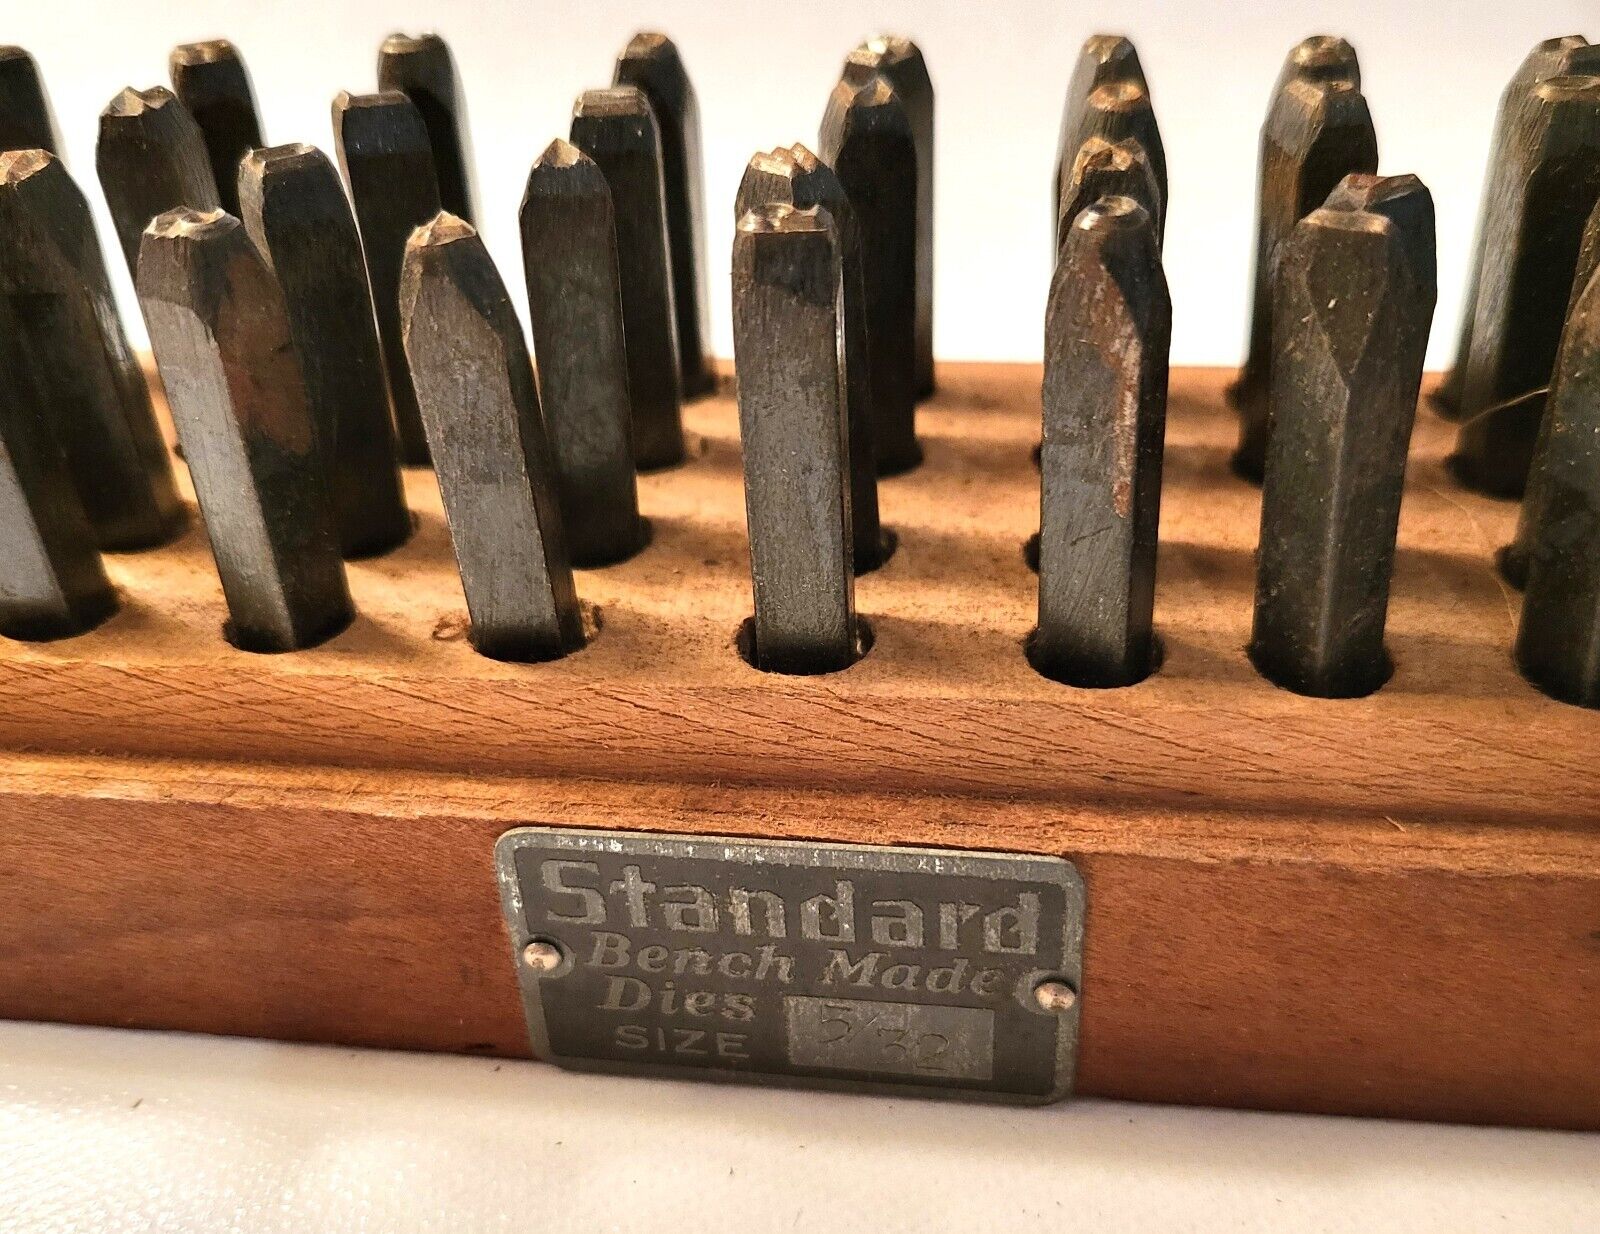 Vintage collectible tools; 36 metal stamping punch set; Standard Bench Made Dies